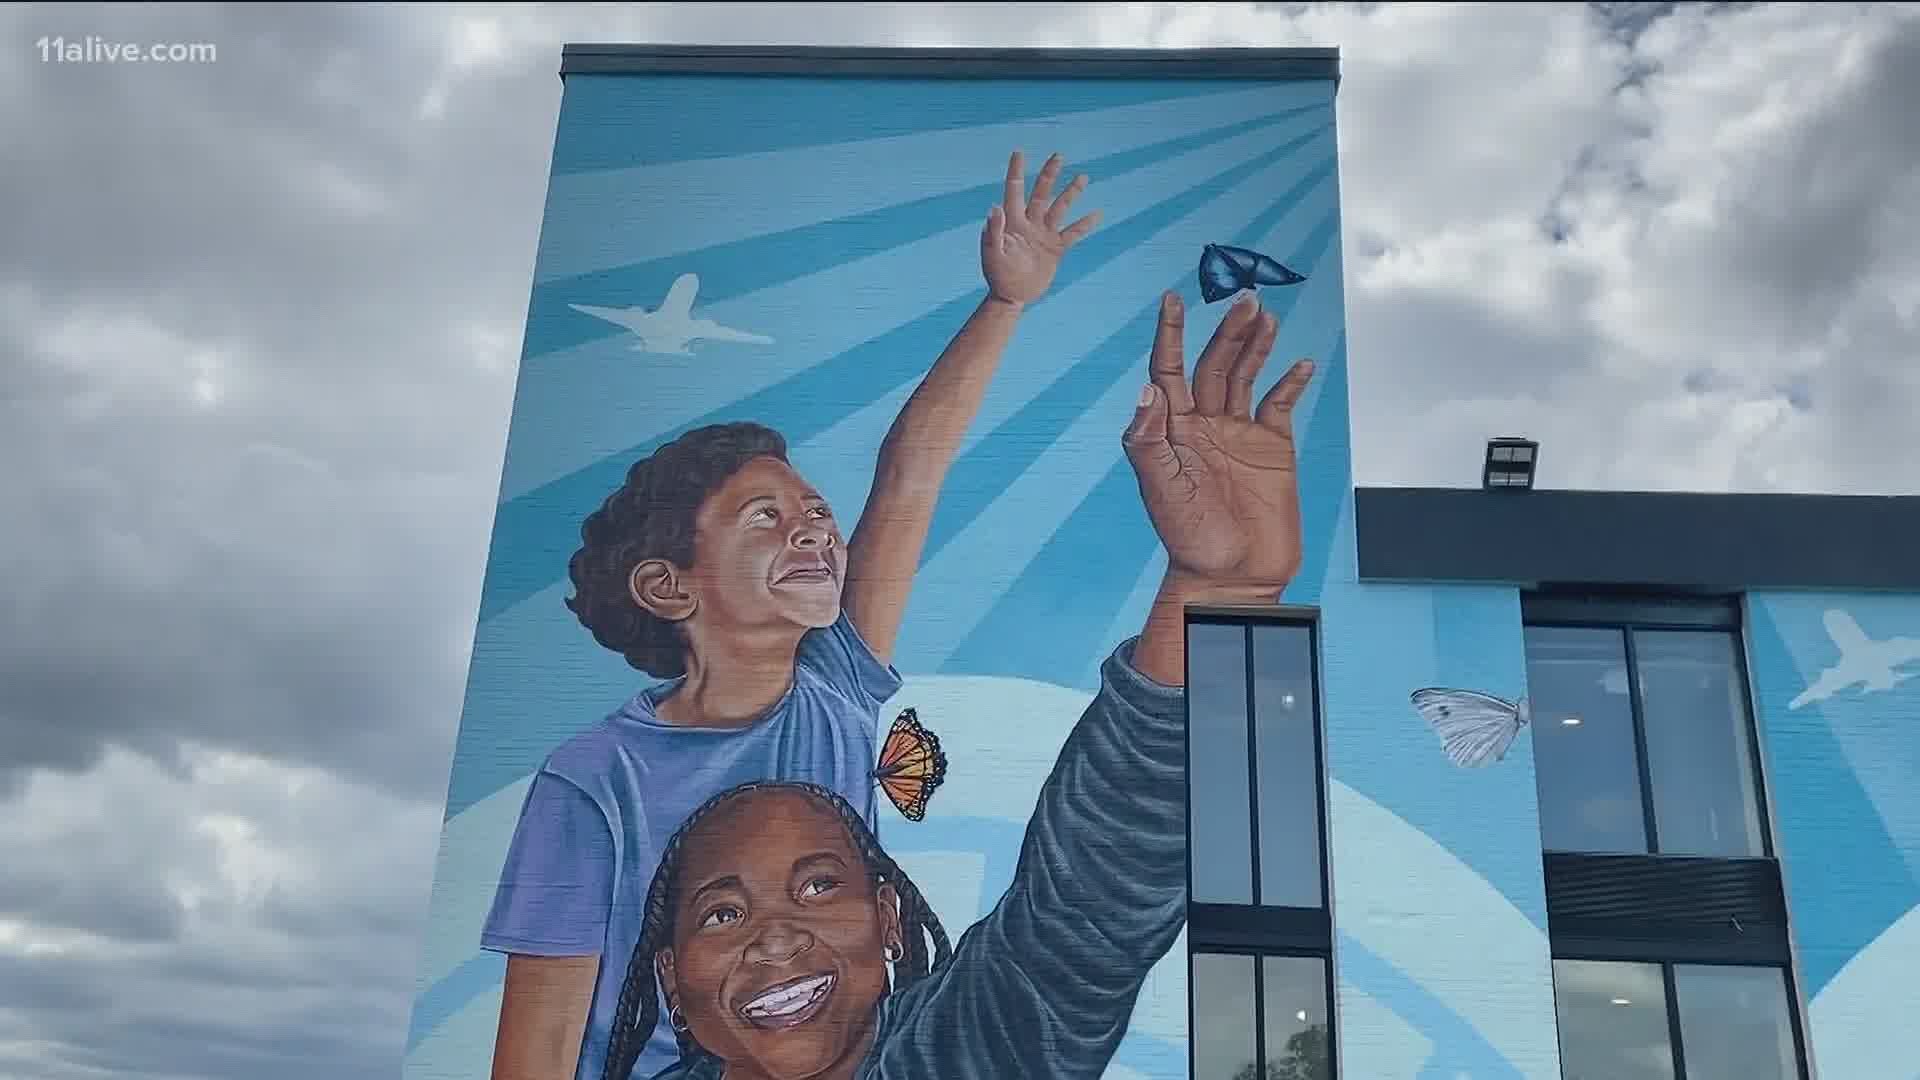 A mural in Hapeville entitled "We Give Each Other the World" celebrates the lives of undocumented immigrants.